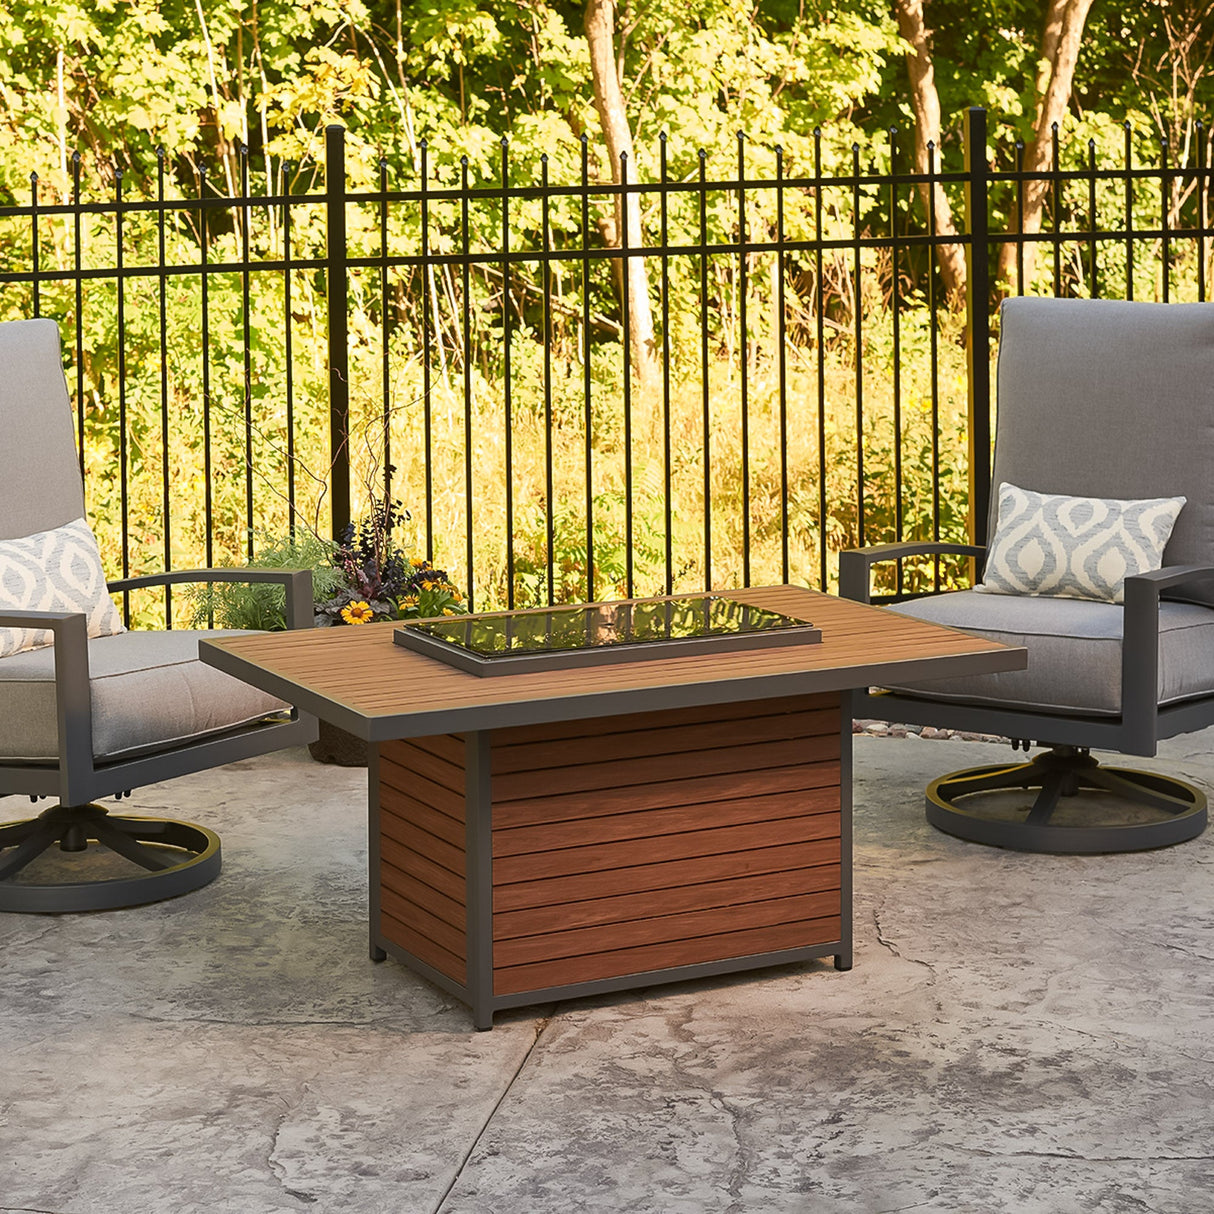 The Kenwood Rectangular Chat Height Gas Fire Pit Table acting as an outdoor table with the cover on top